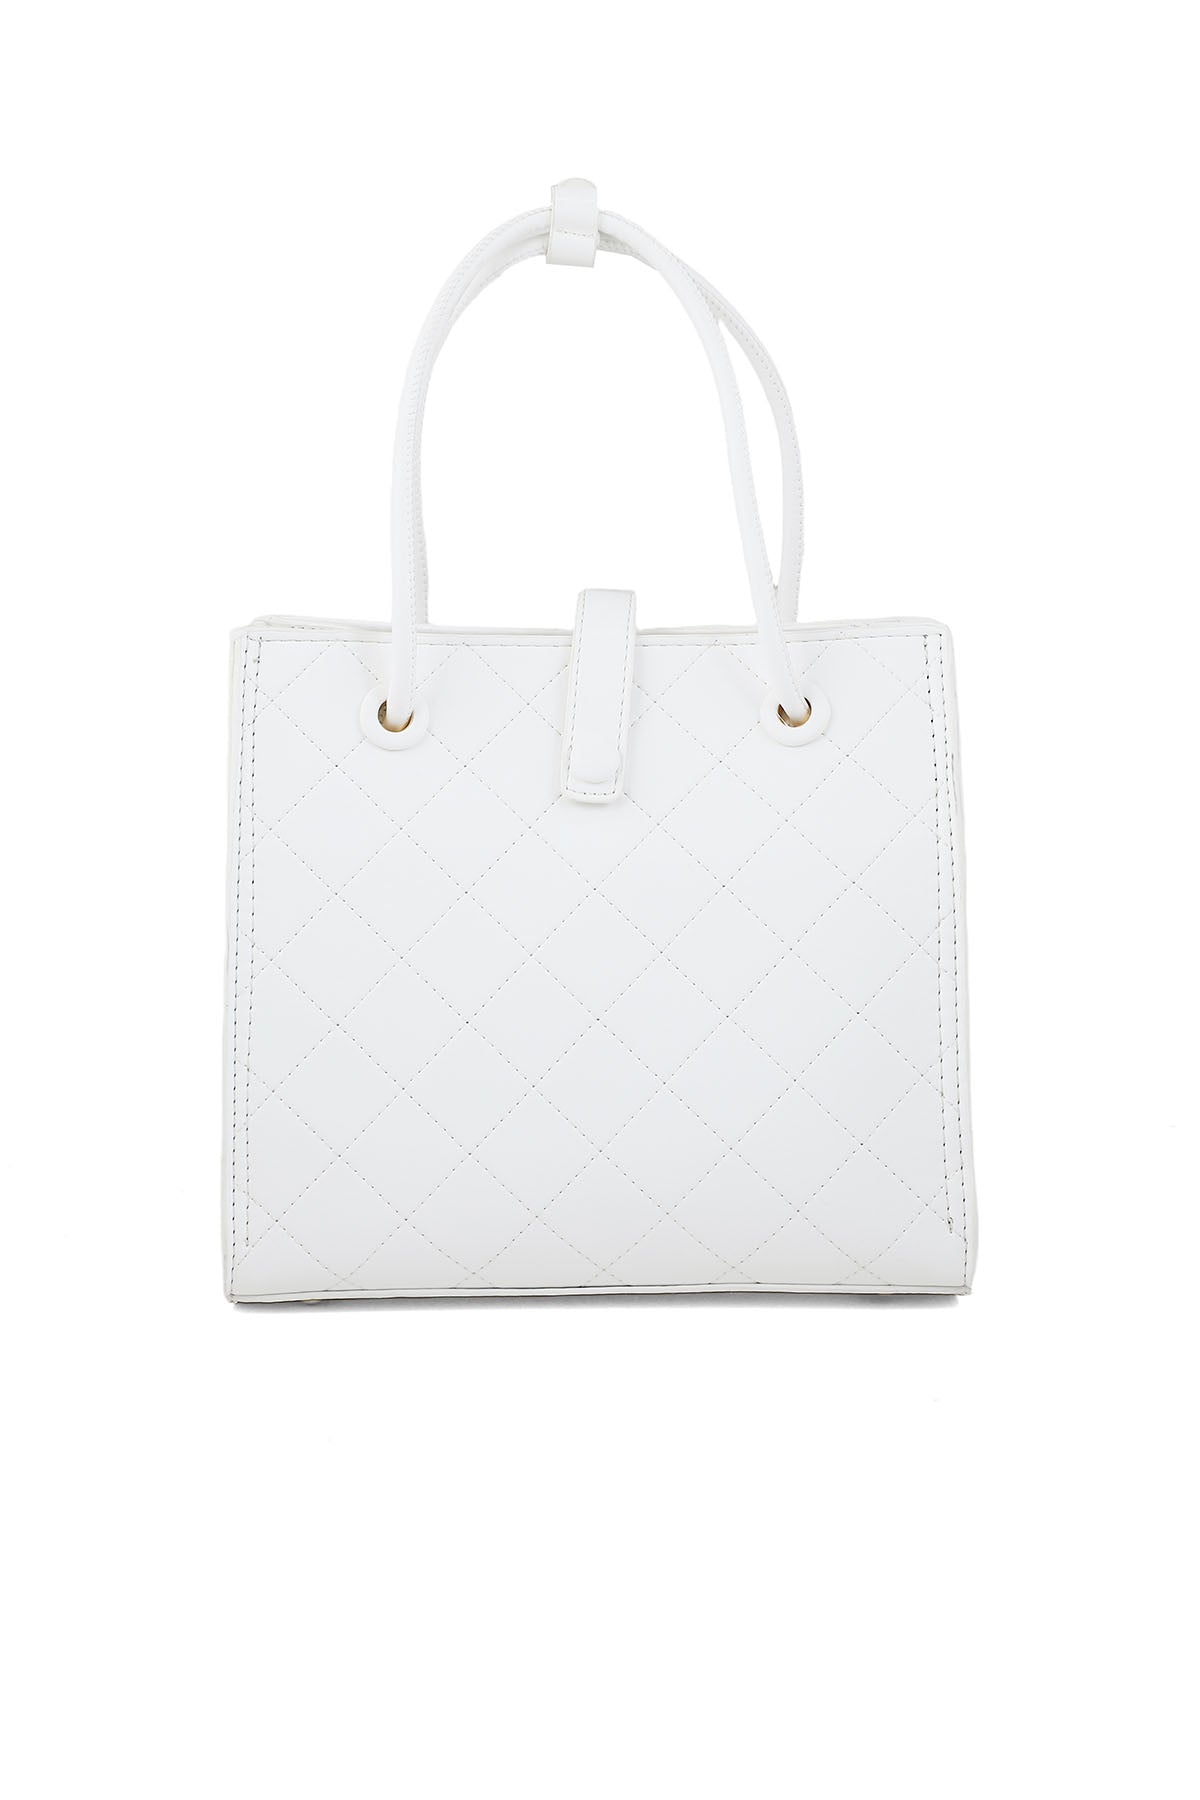 Formal Tote Hand Bags B15068-White